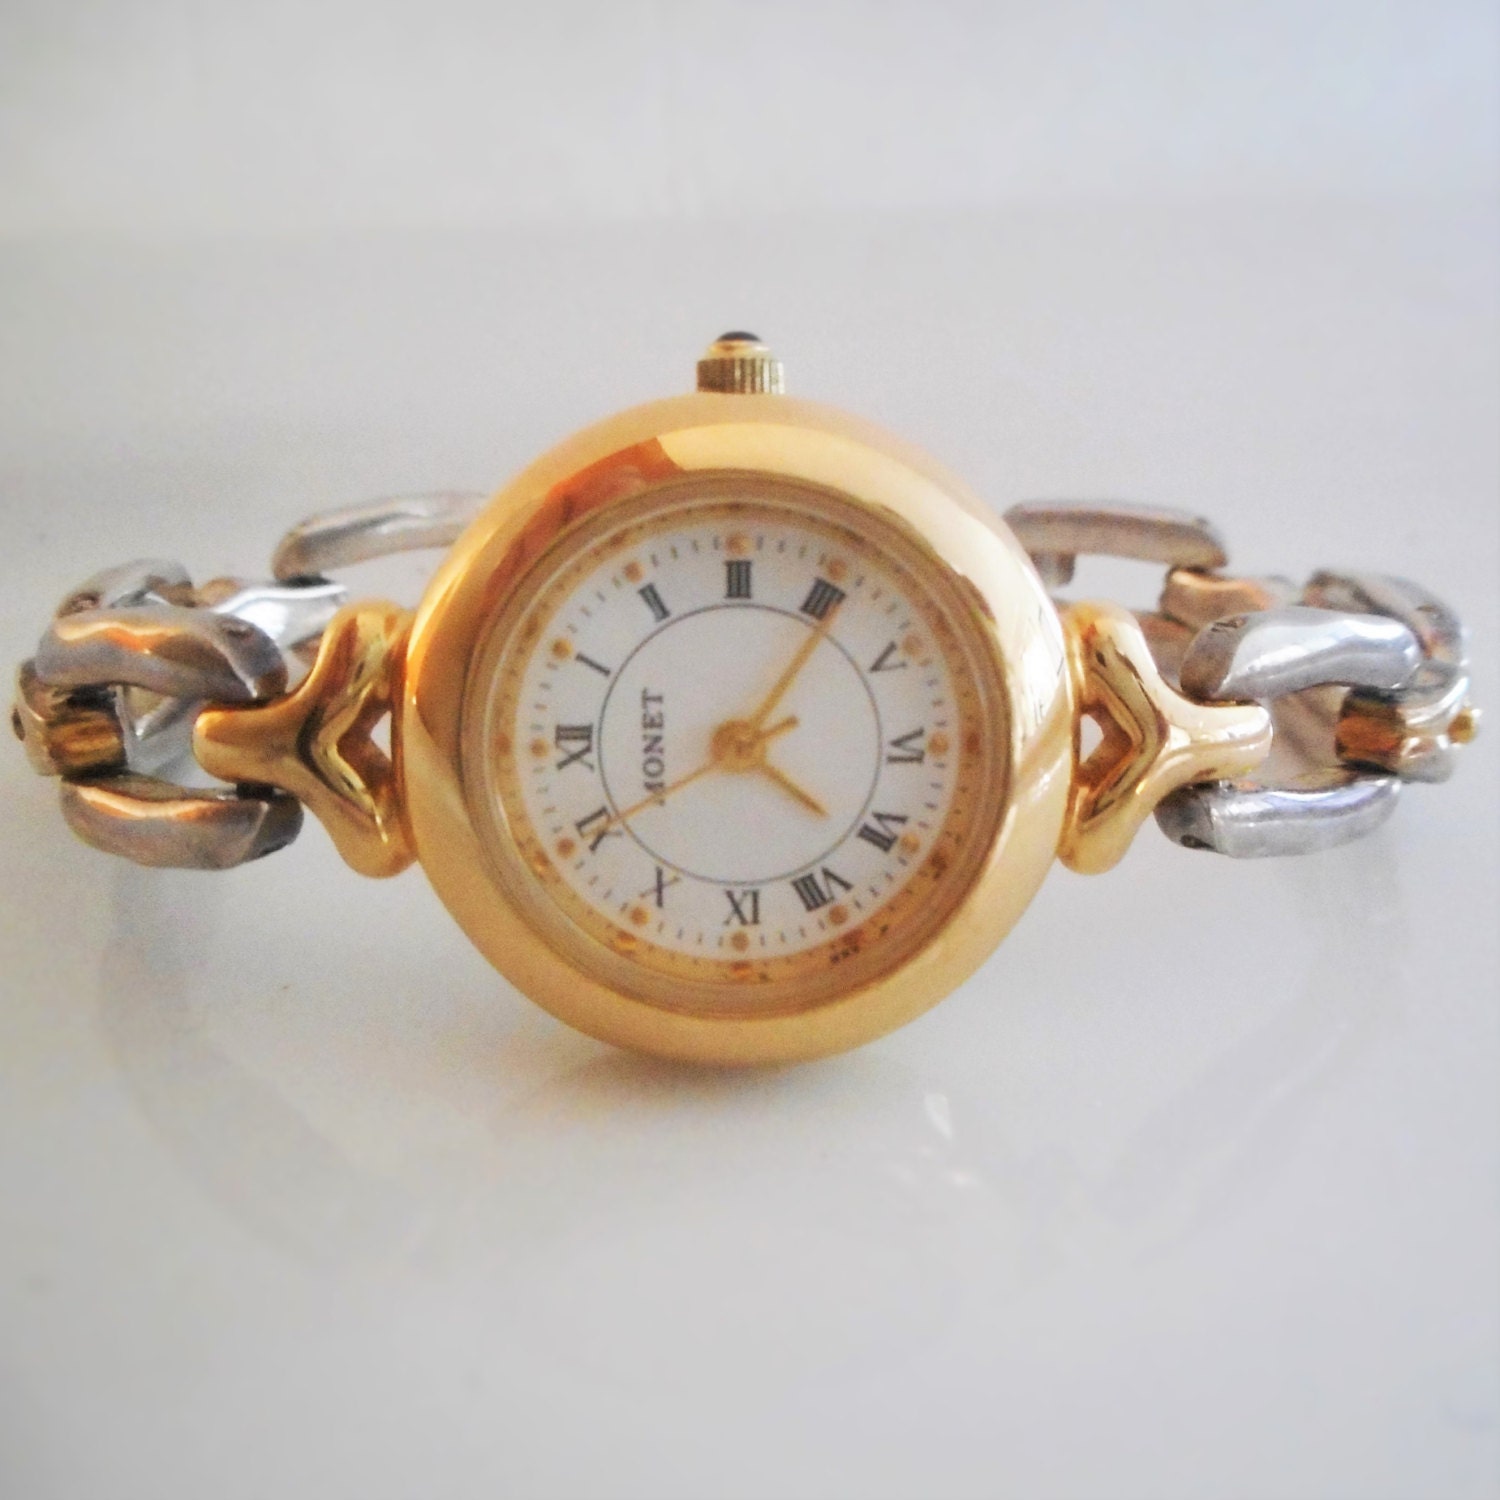 Vintage MONET Women's Working Watch for Small Wrists..New